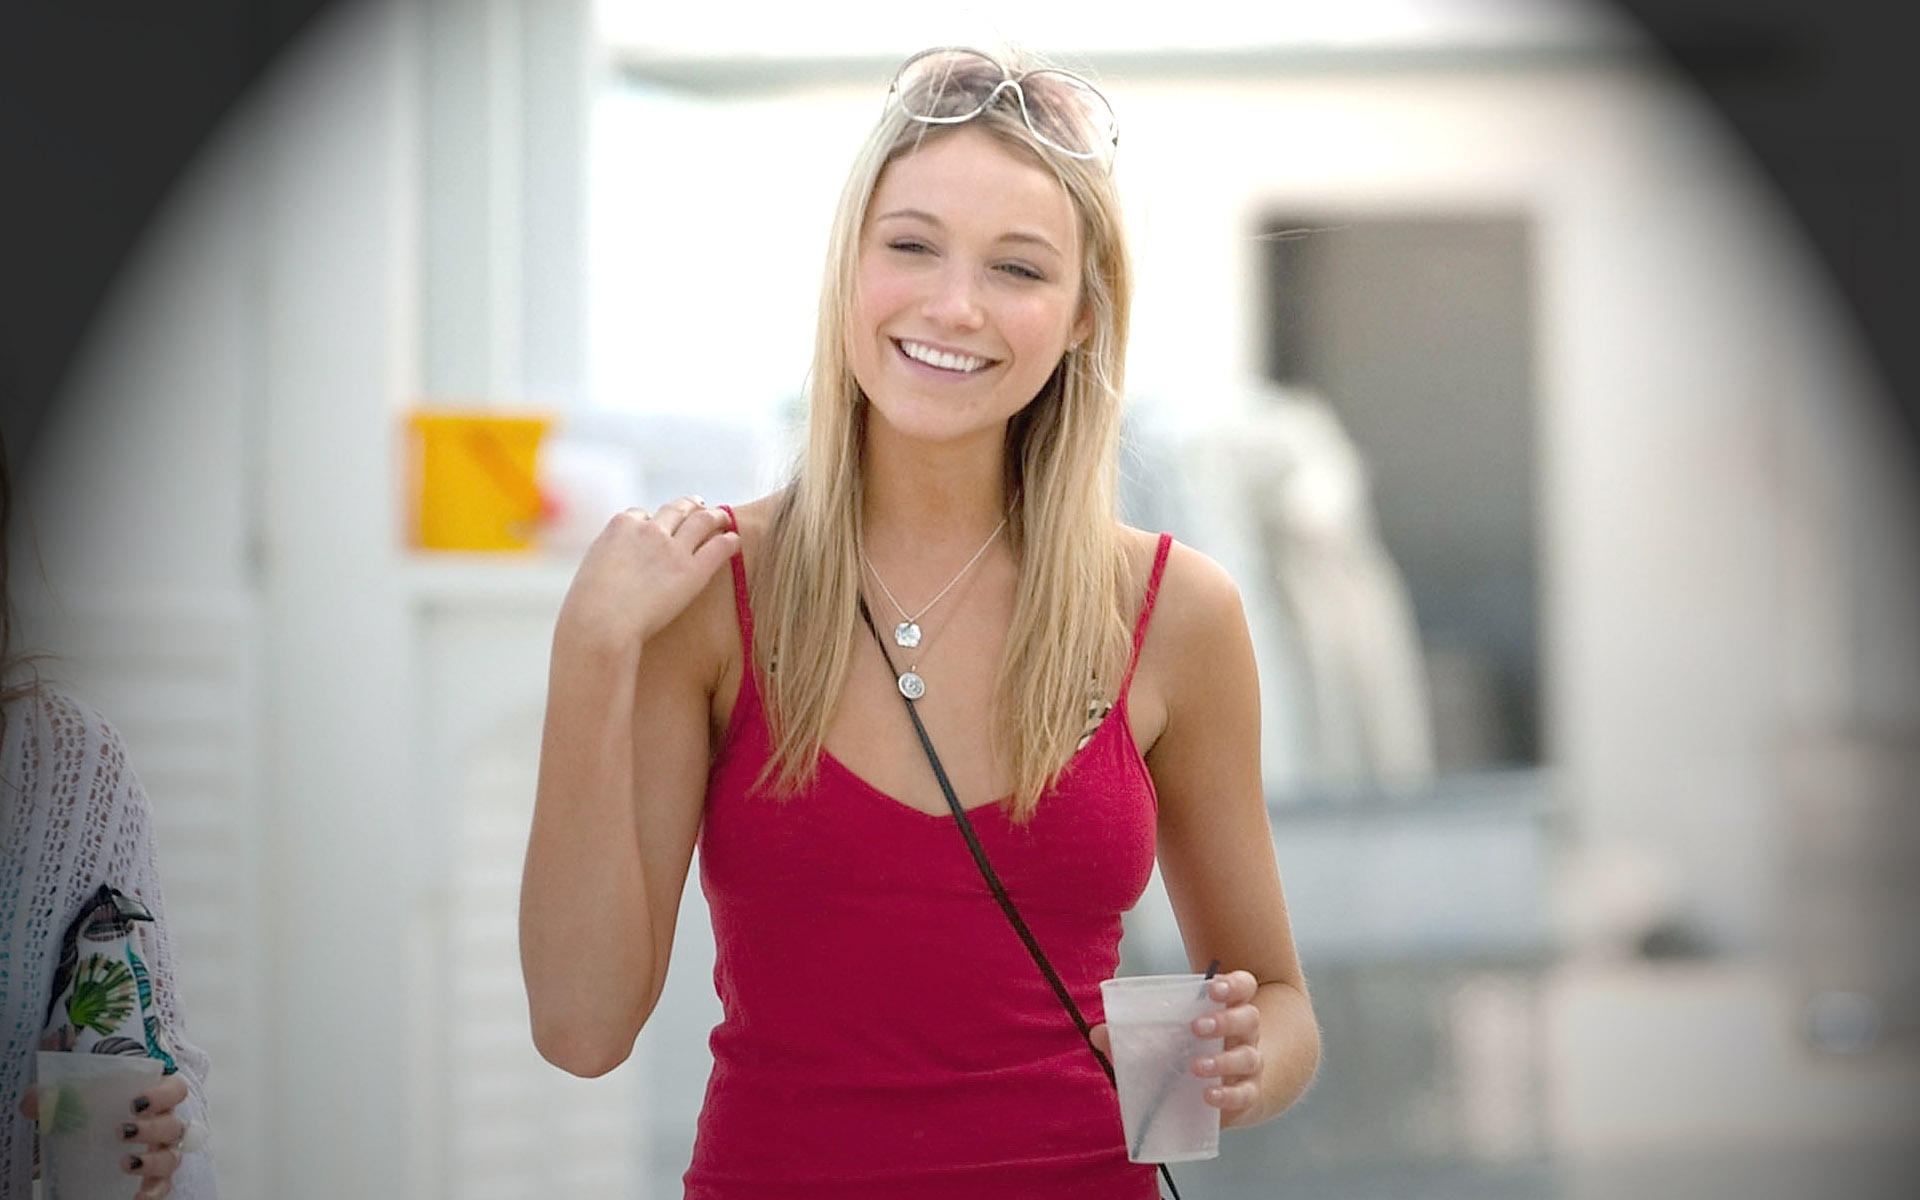 Desktop Katrina Bowden Beautiful Smile Look Background Mobile Pictures Free Hd